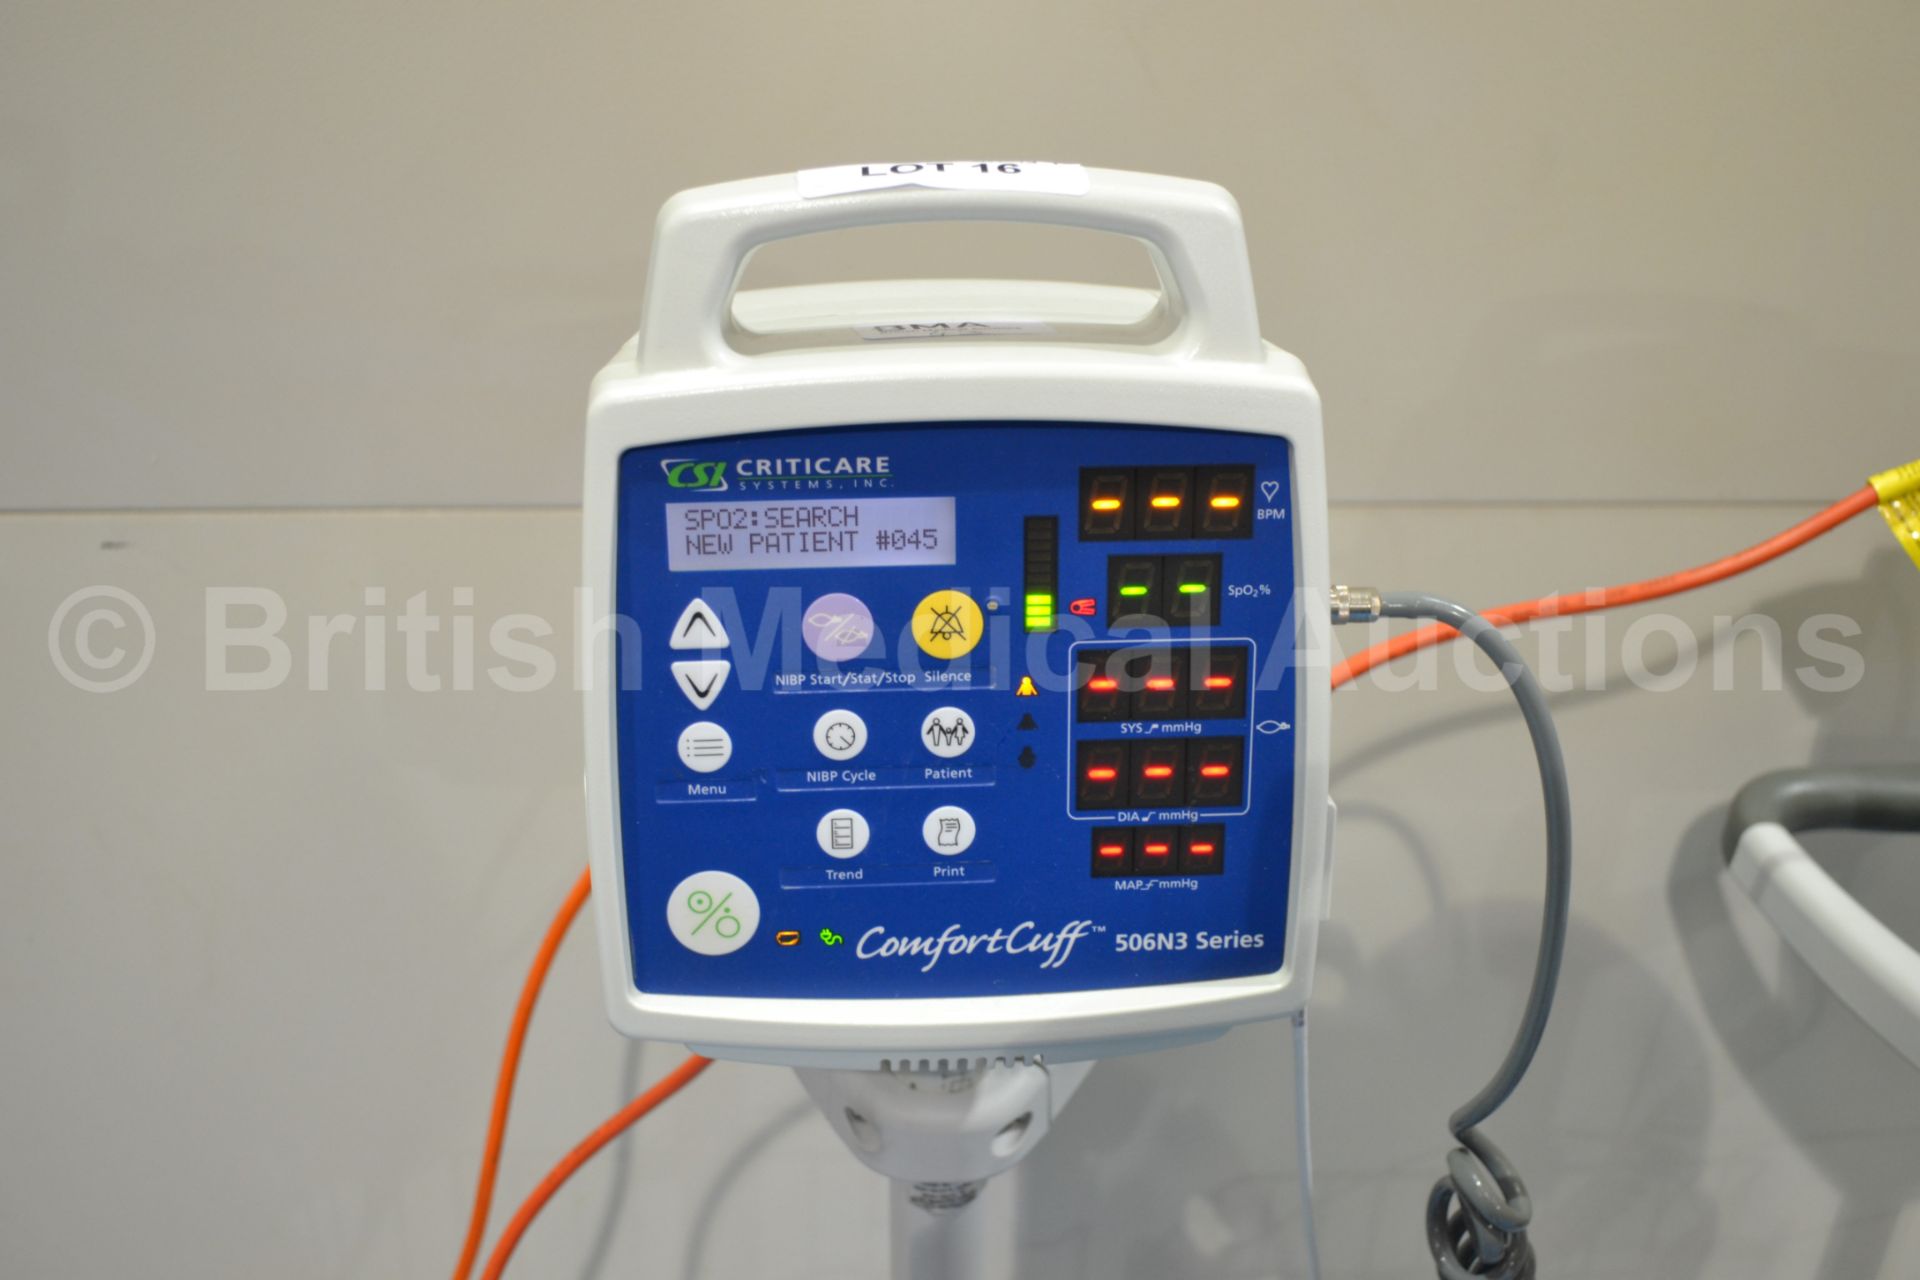 2x Criticare Systems 506N3 Series Vital Signs Moni - Image 4 of 4